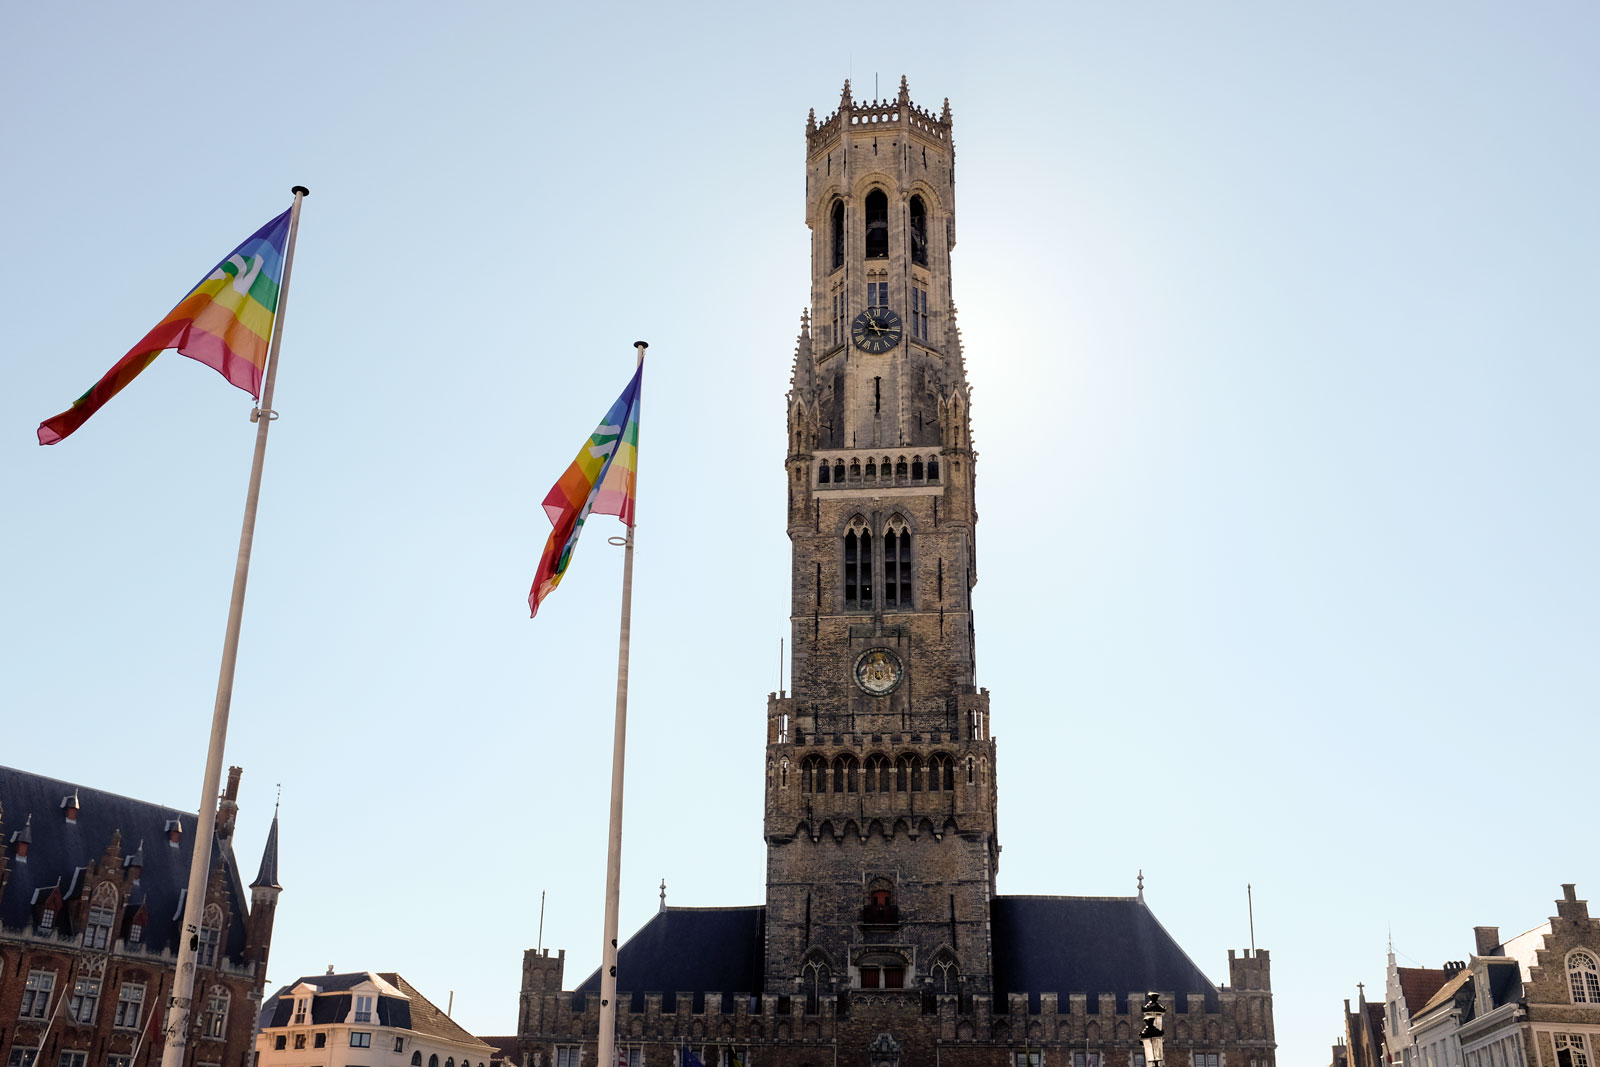 The Bruges Belfry in a photo taken from below